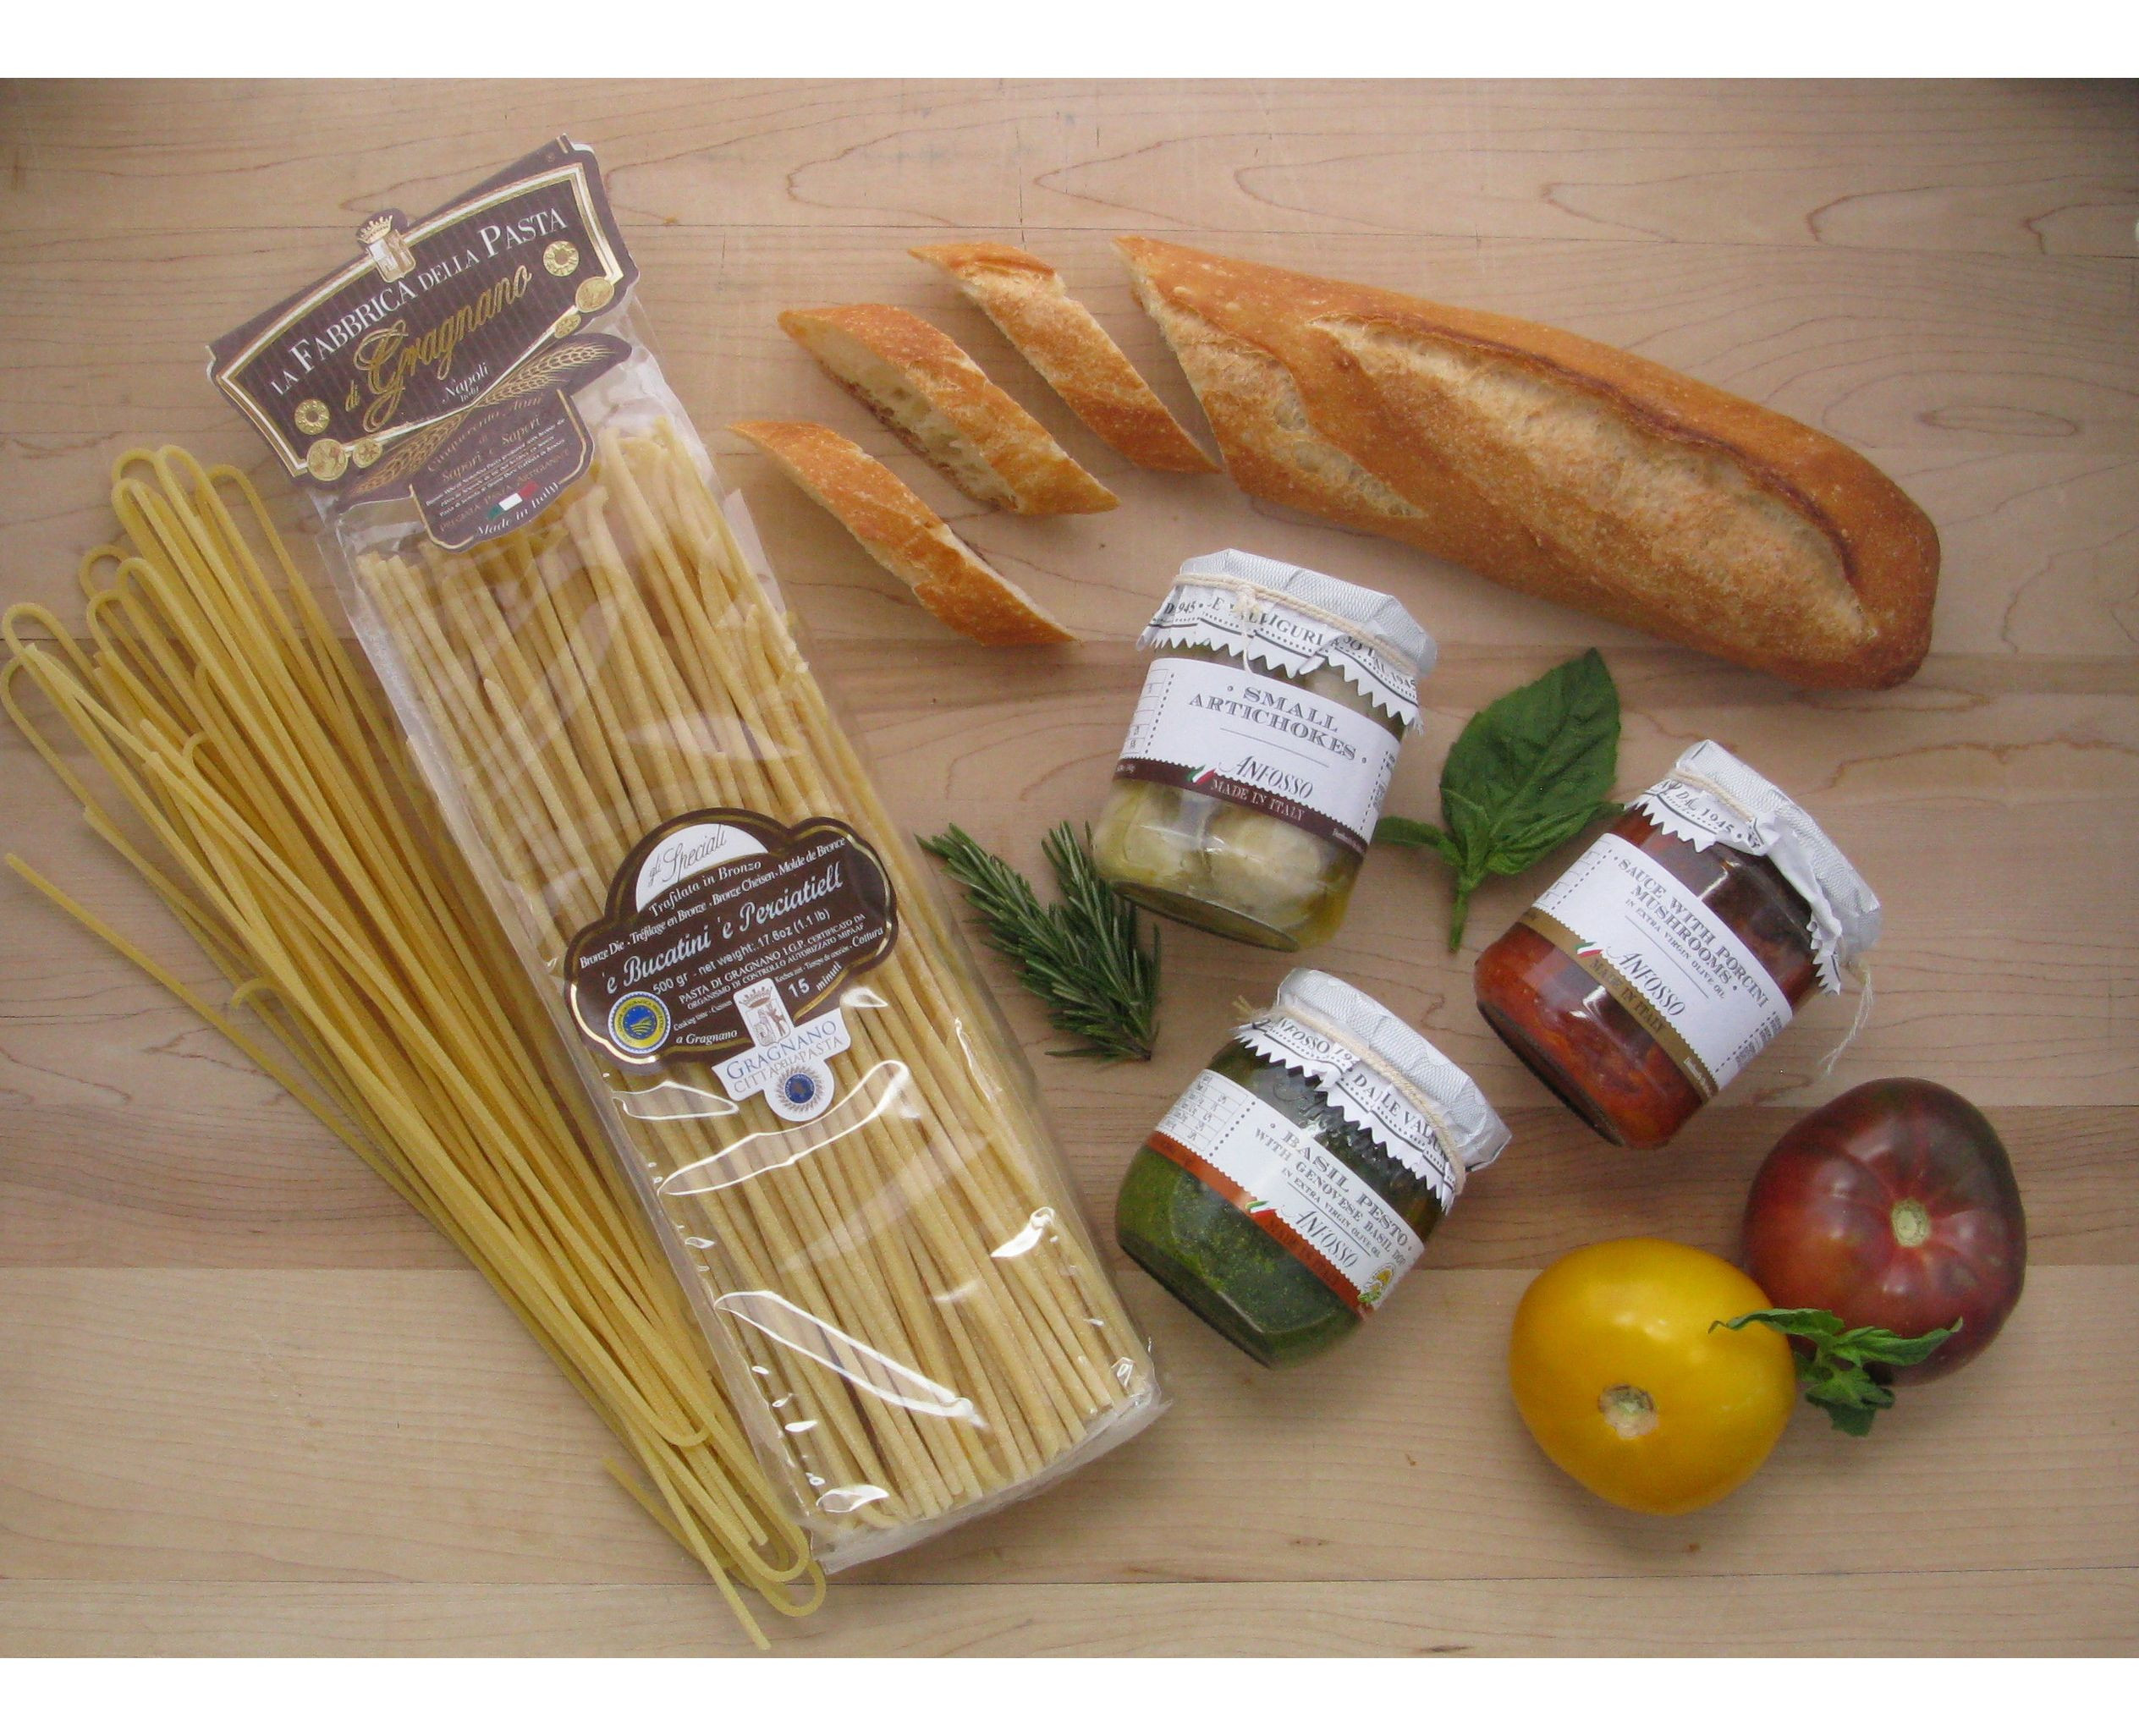 Food Gift Baskets Ideas
 Gourmet Food Baskets Mouthwatering Gift Ideas